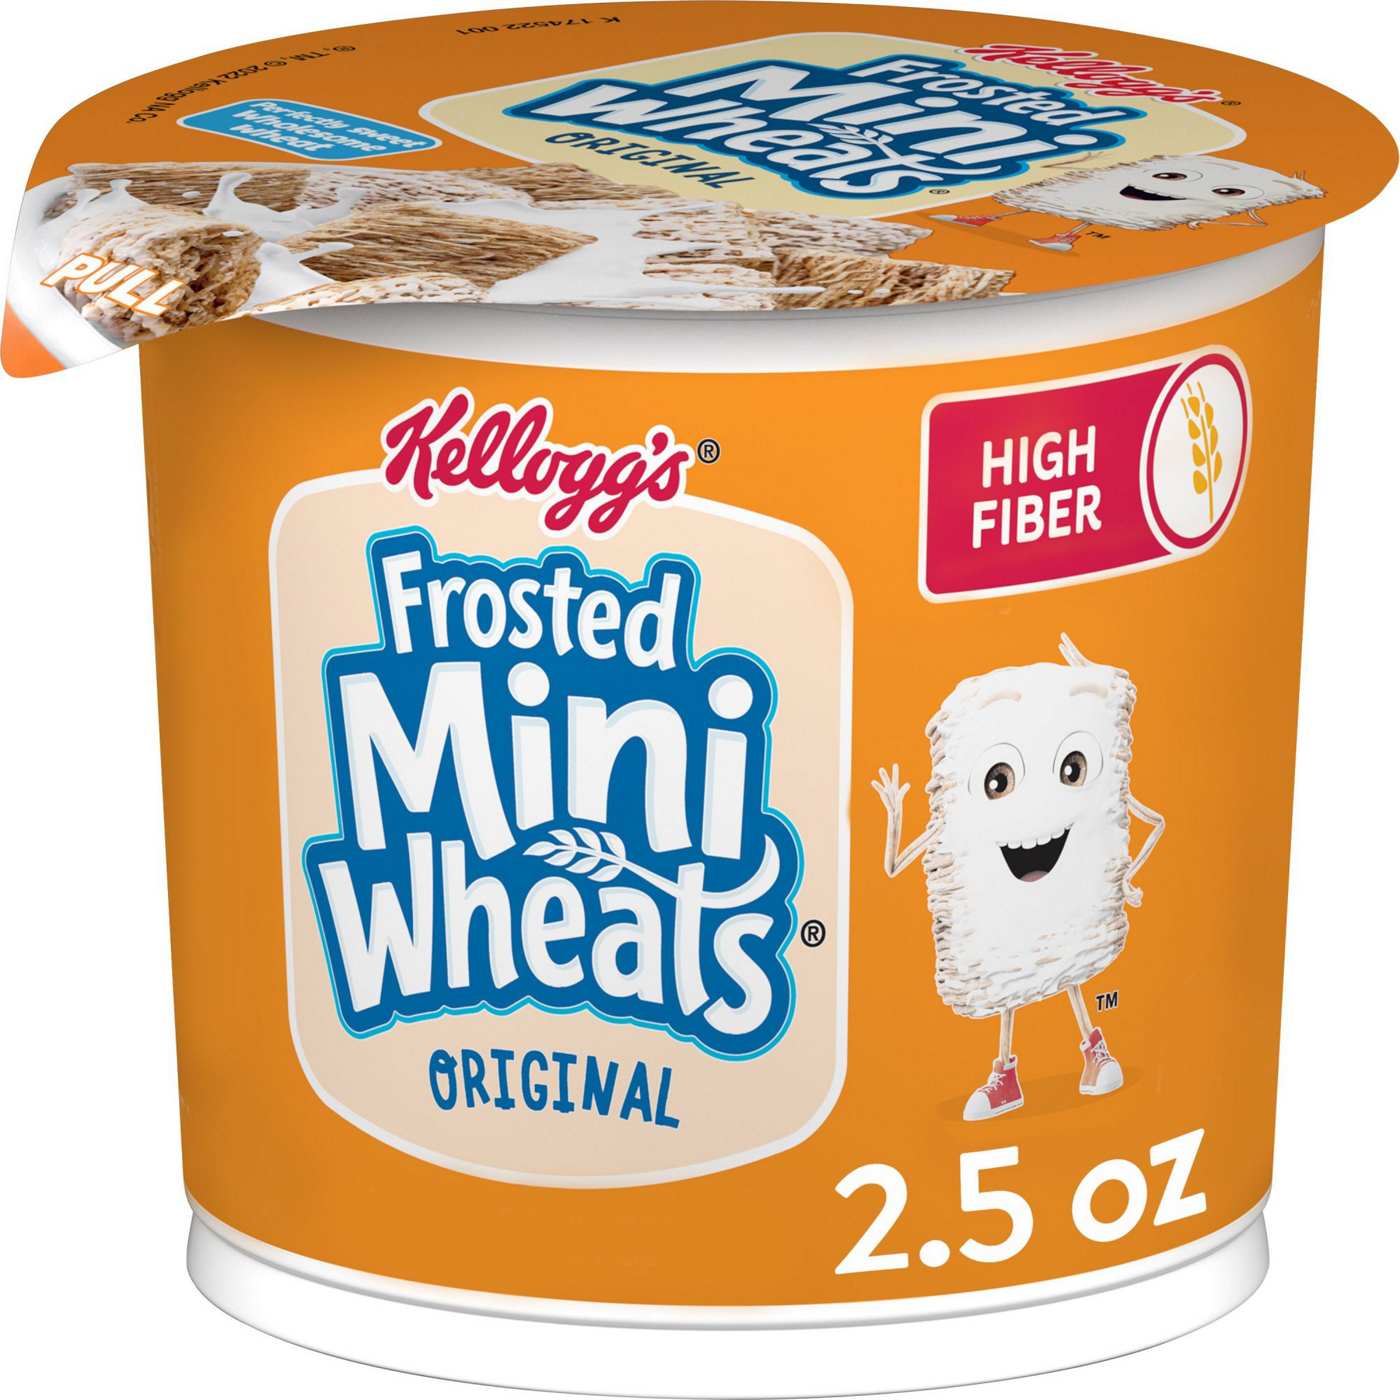 Kellogg's Frosted Mini-Wheats Cereal Cup; image 1 of 5